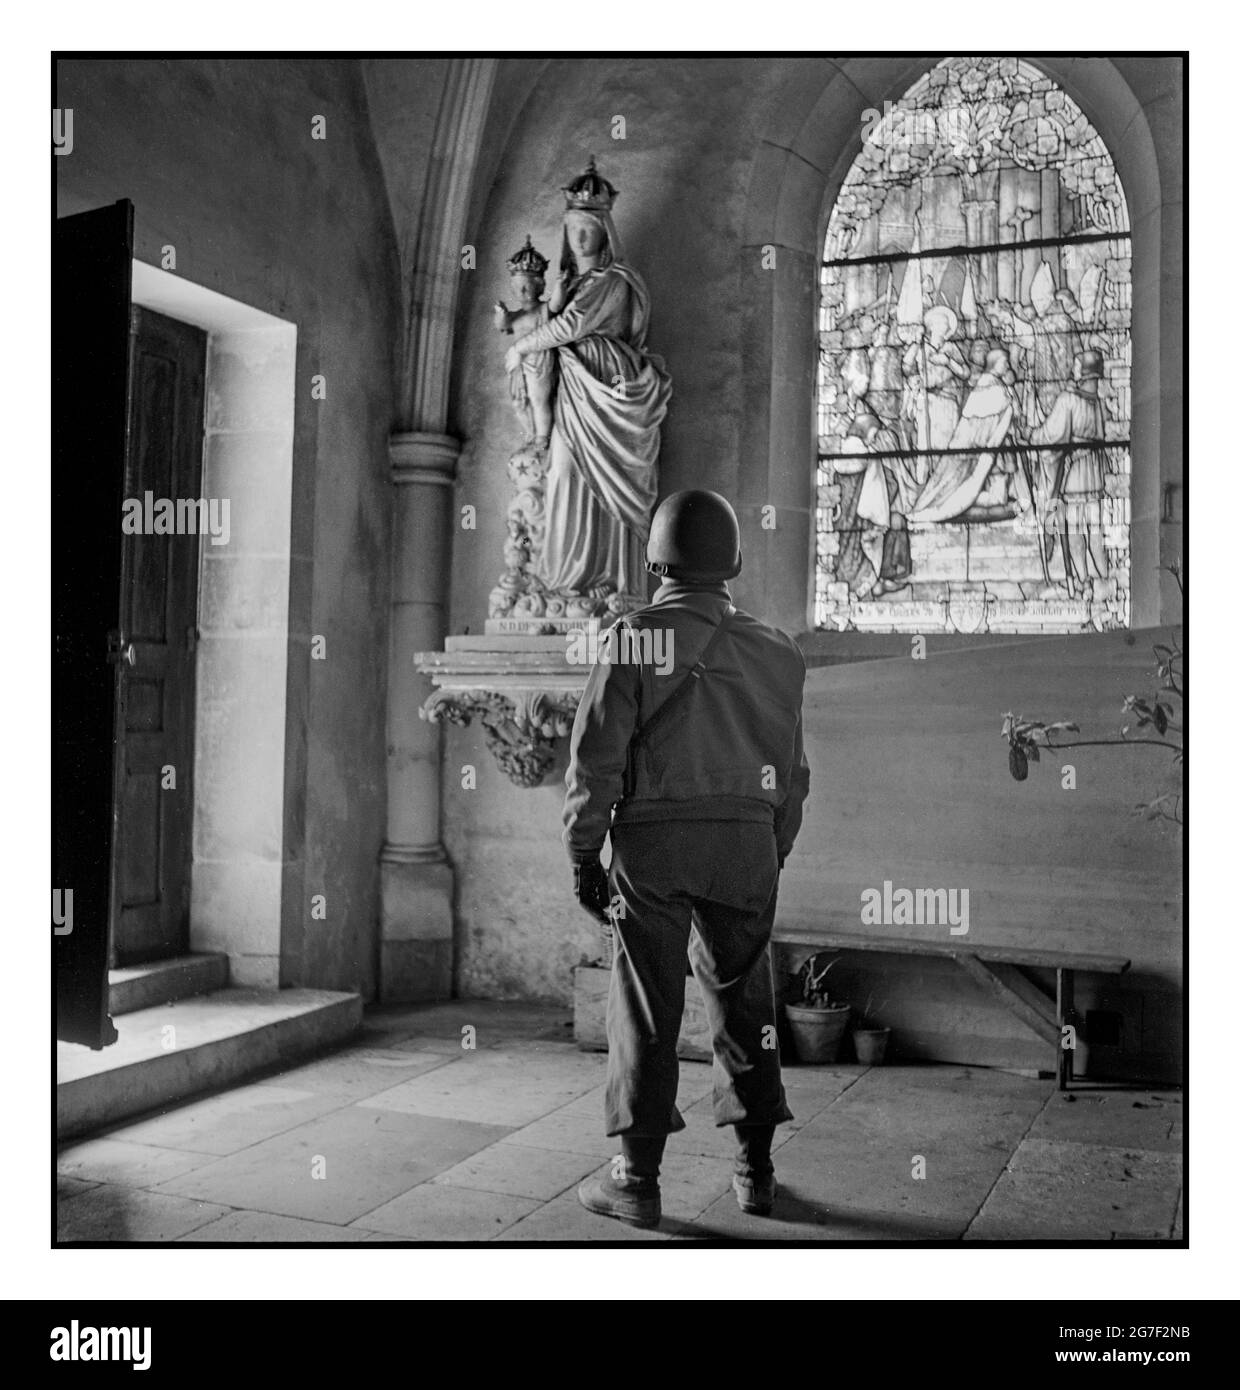 WW2 GI American Soldier pauses to look at a statue of the Madonna and Child in a church, in Italy Europe during World War II  Toni Frissell photographer taken between 1940 and 1945 -  World War, 1939-1945--Religious aspects Churches--Europe--1940-1950, Soldiers--Europe--1940-1950 Stock Photo